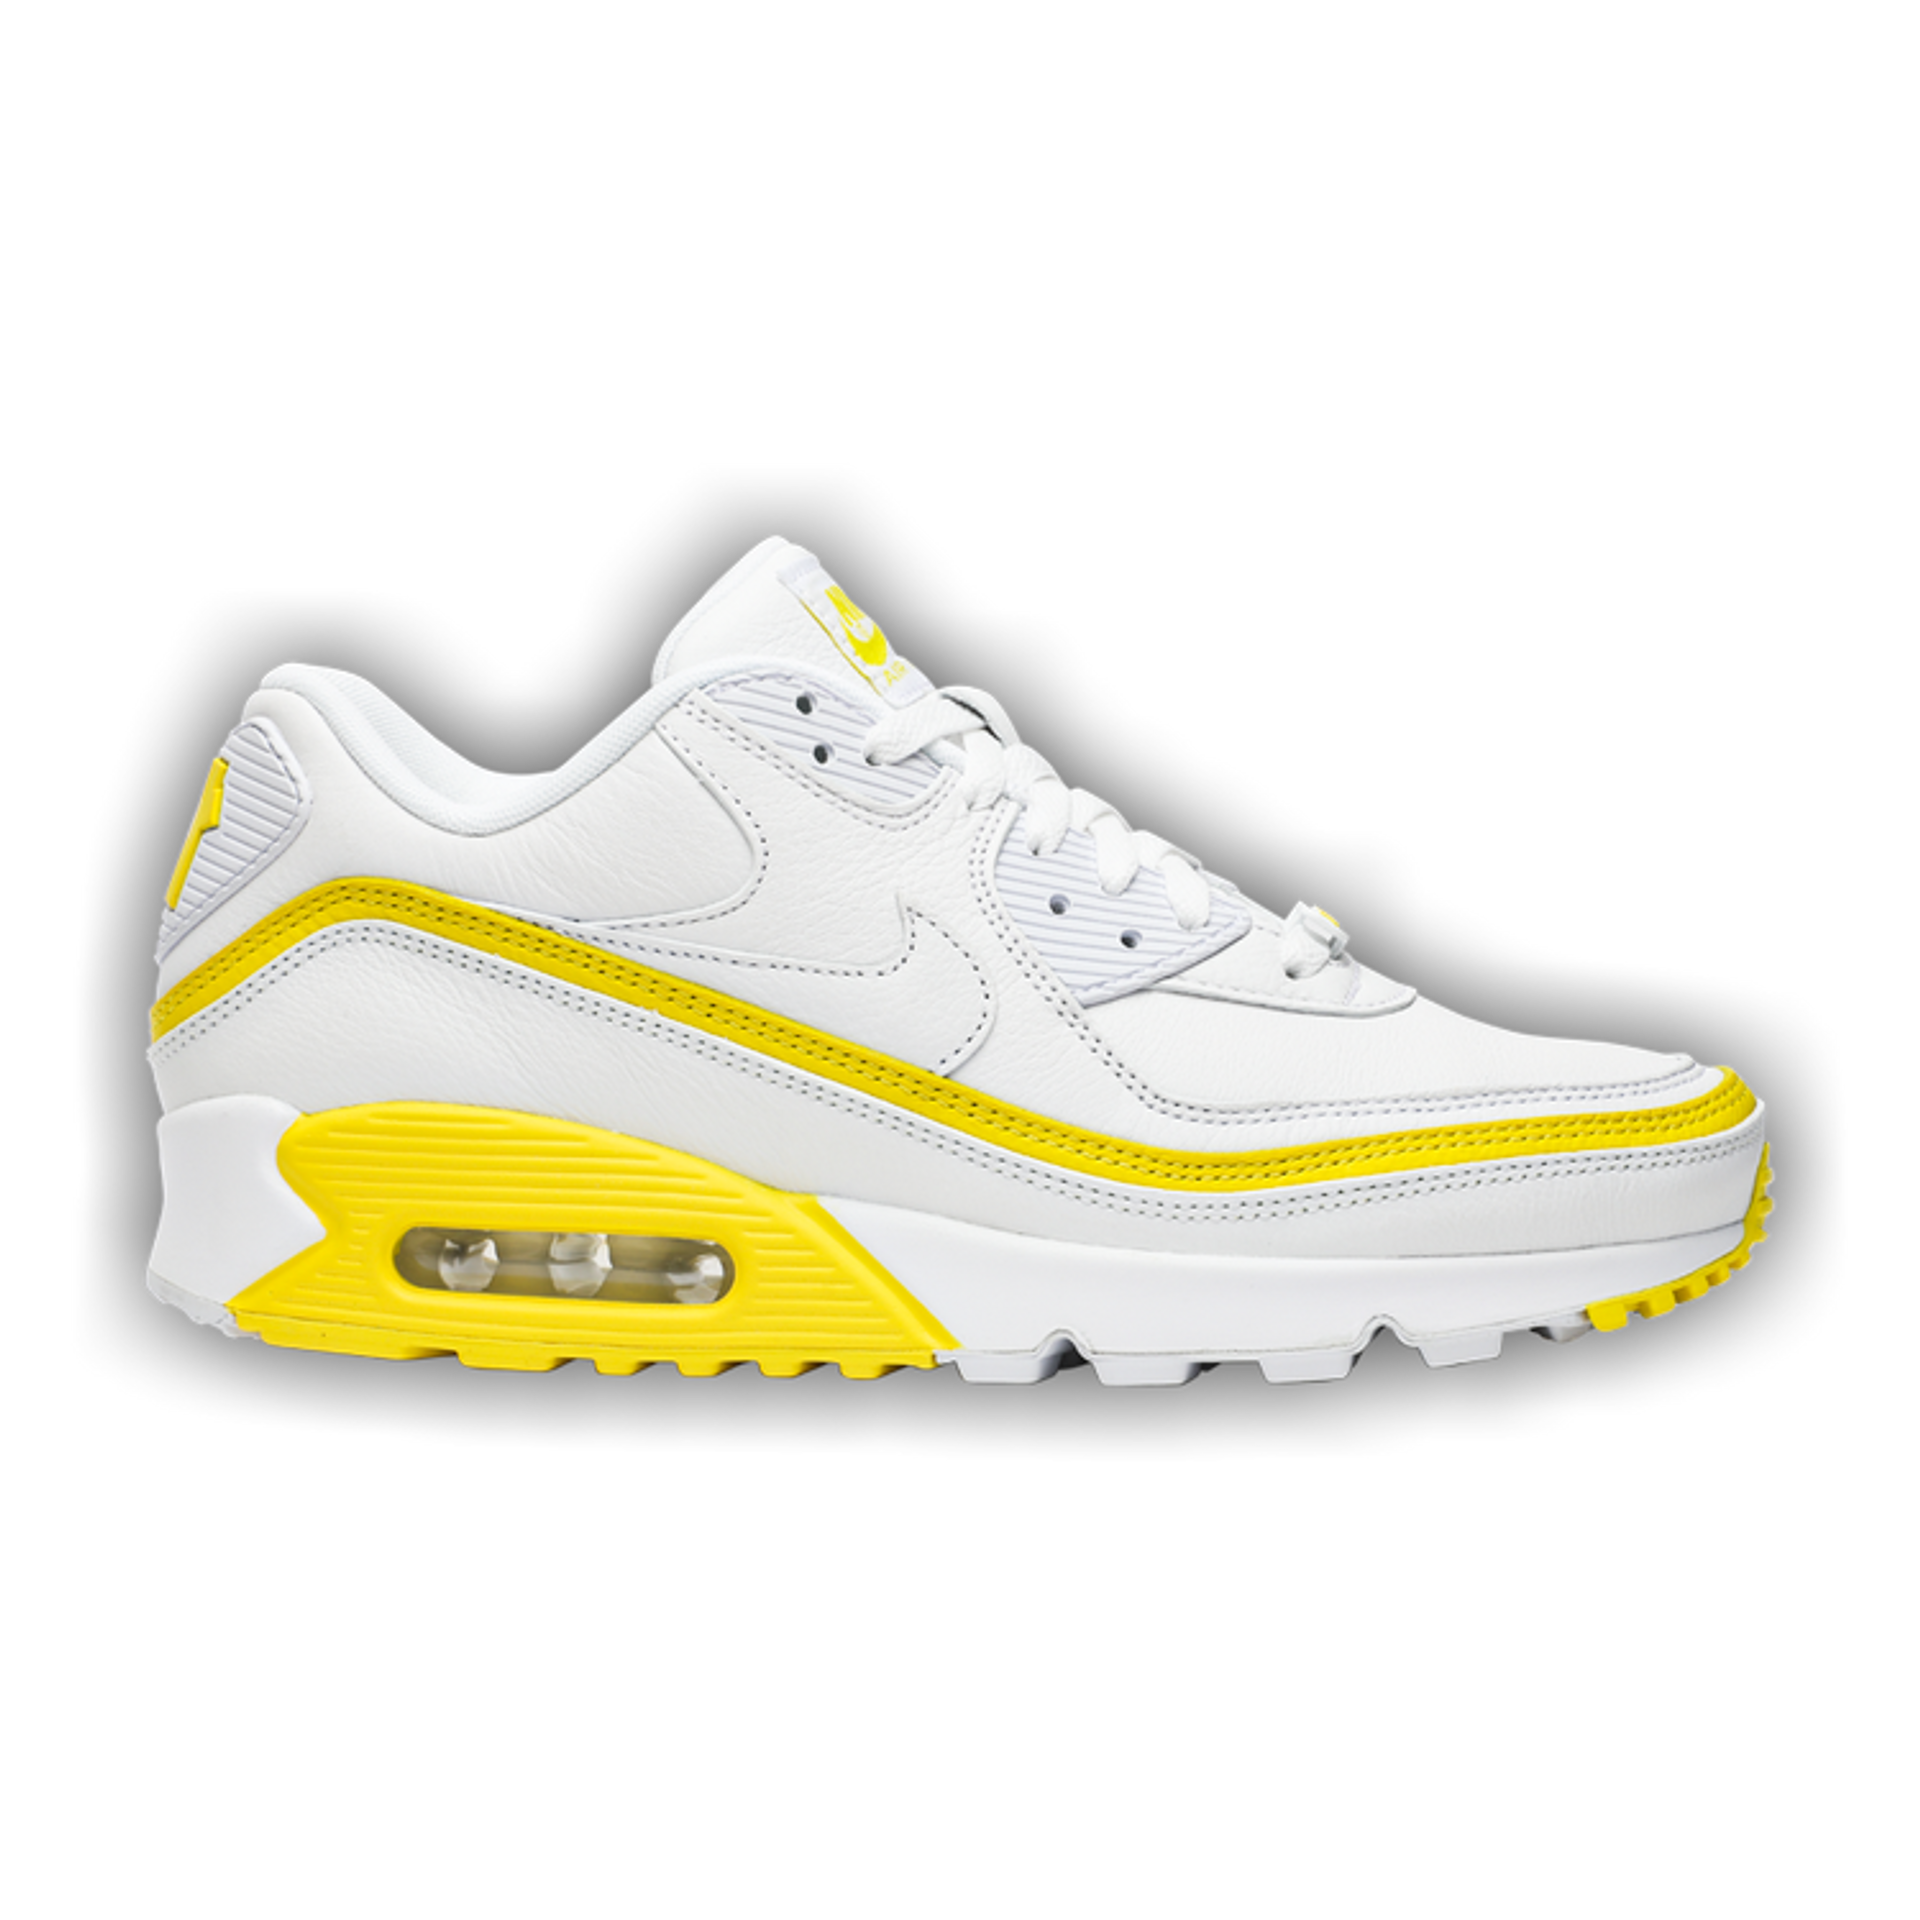 Nike Undefeated x Air Max 90 'White Optic Yellow'